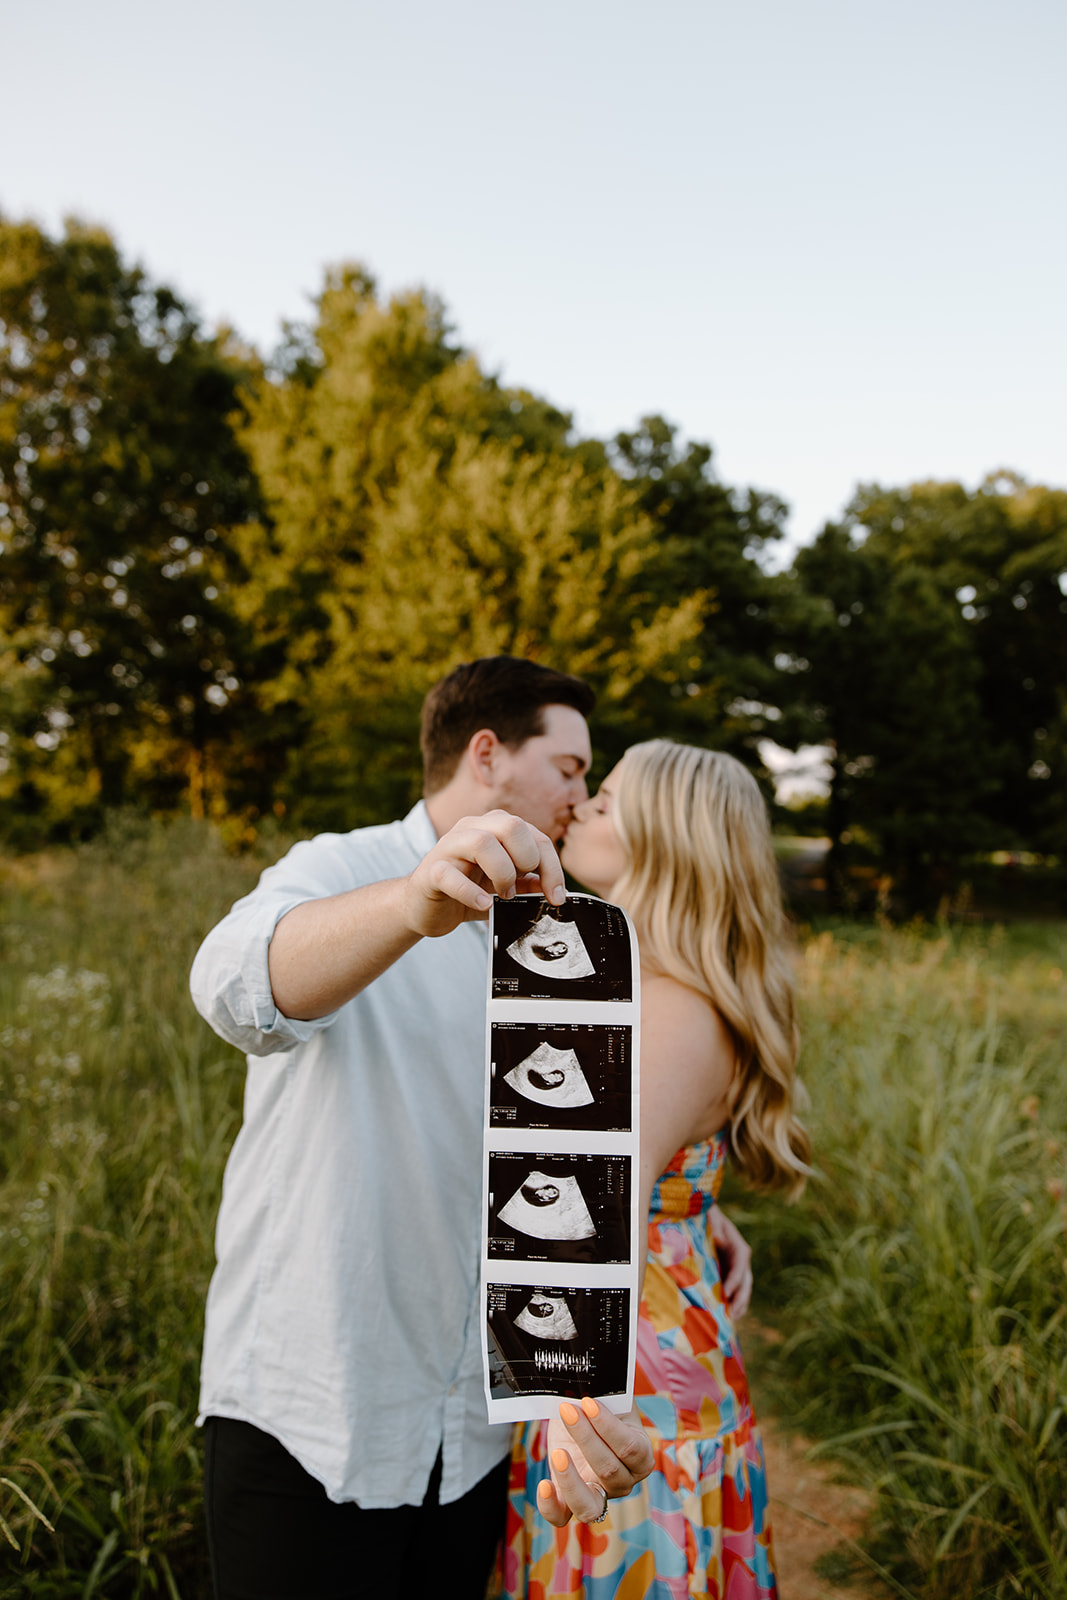 Pregnancy announcement photoshoot in Raleigh, North Carolina